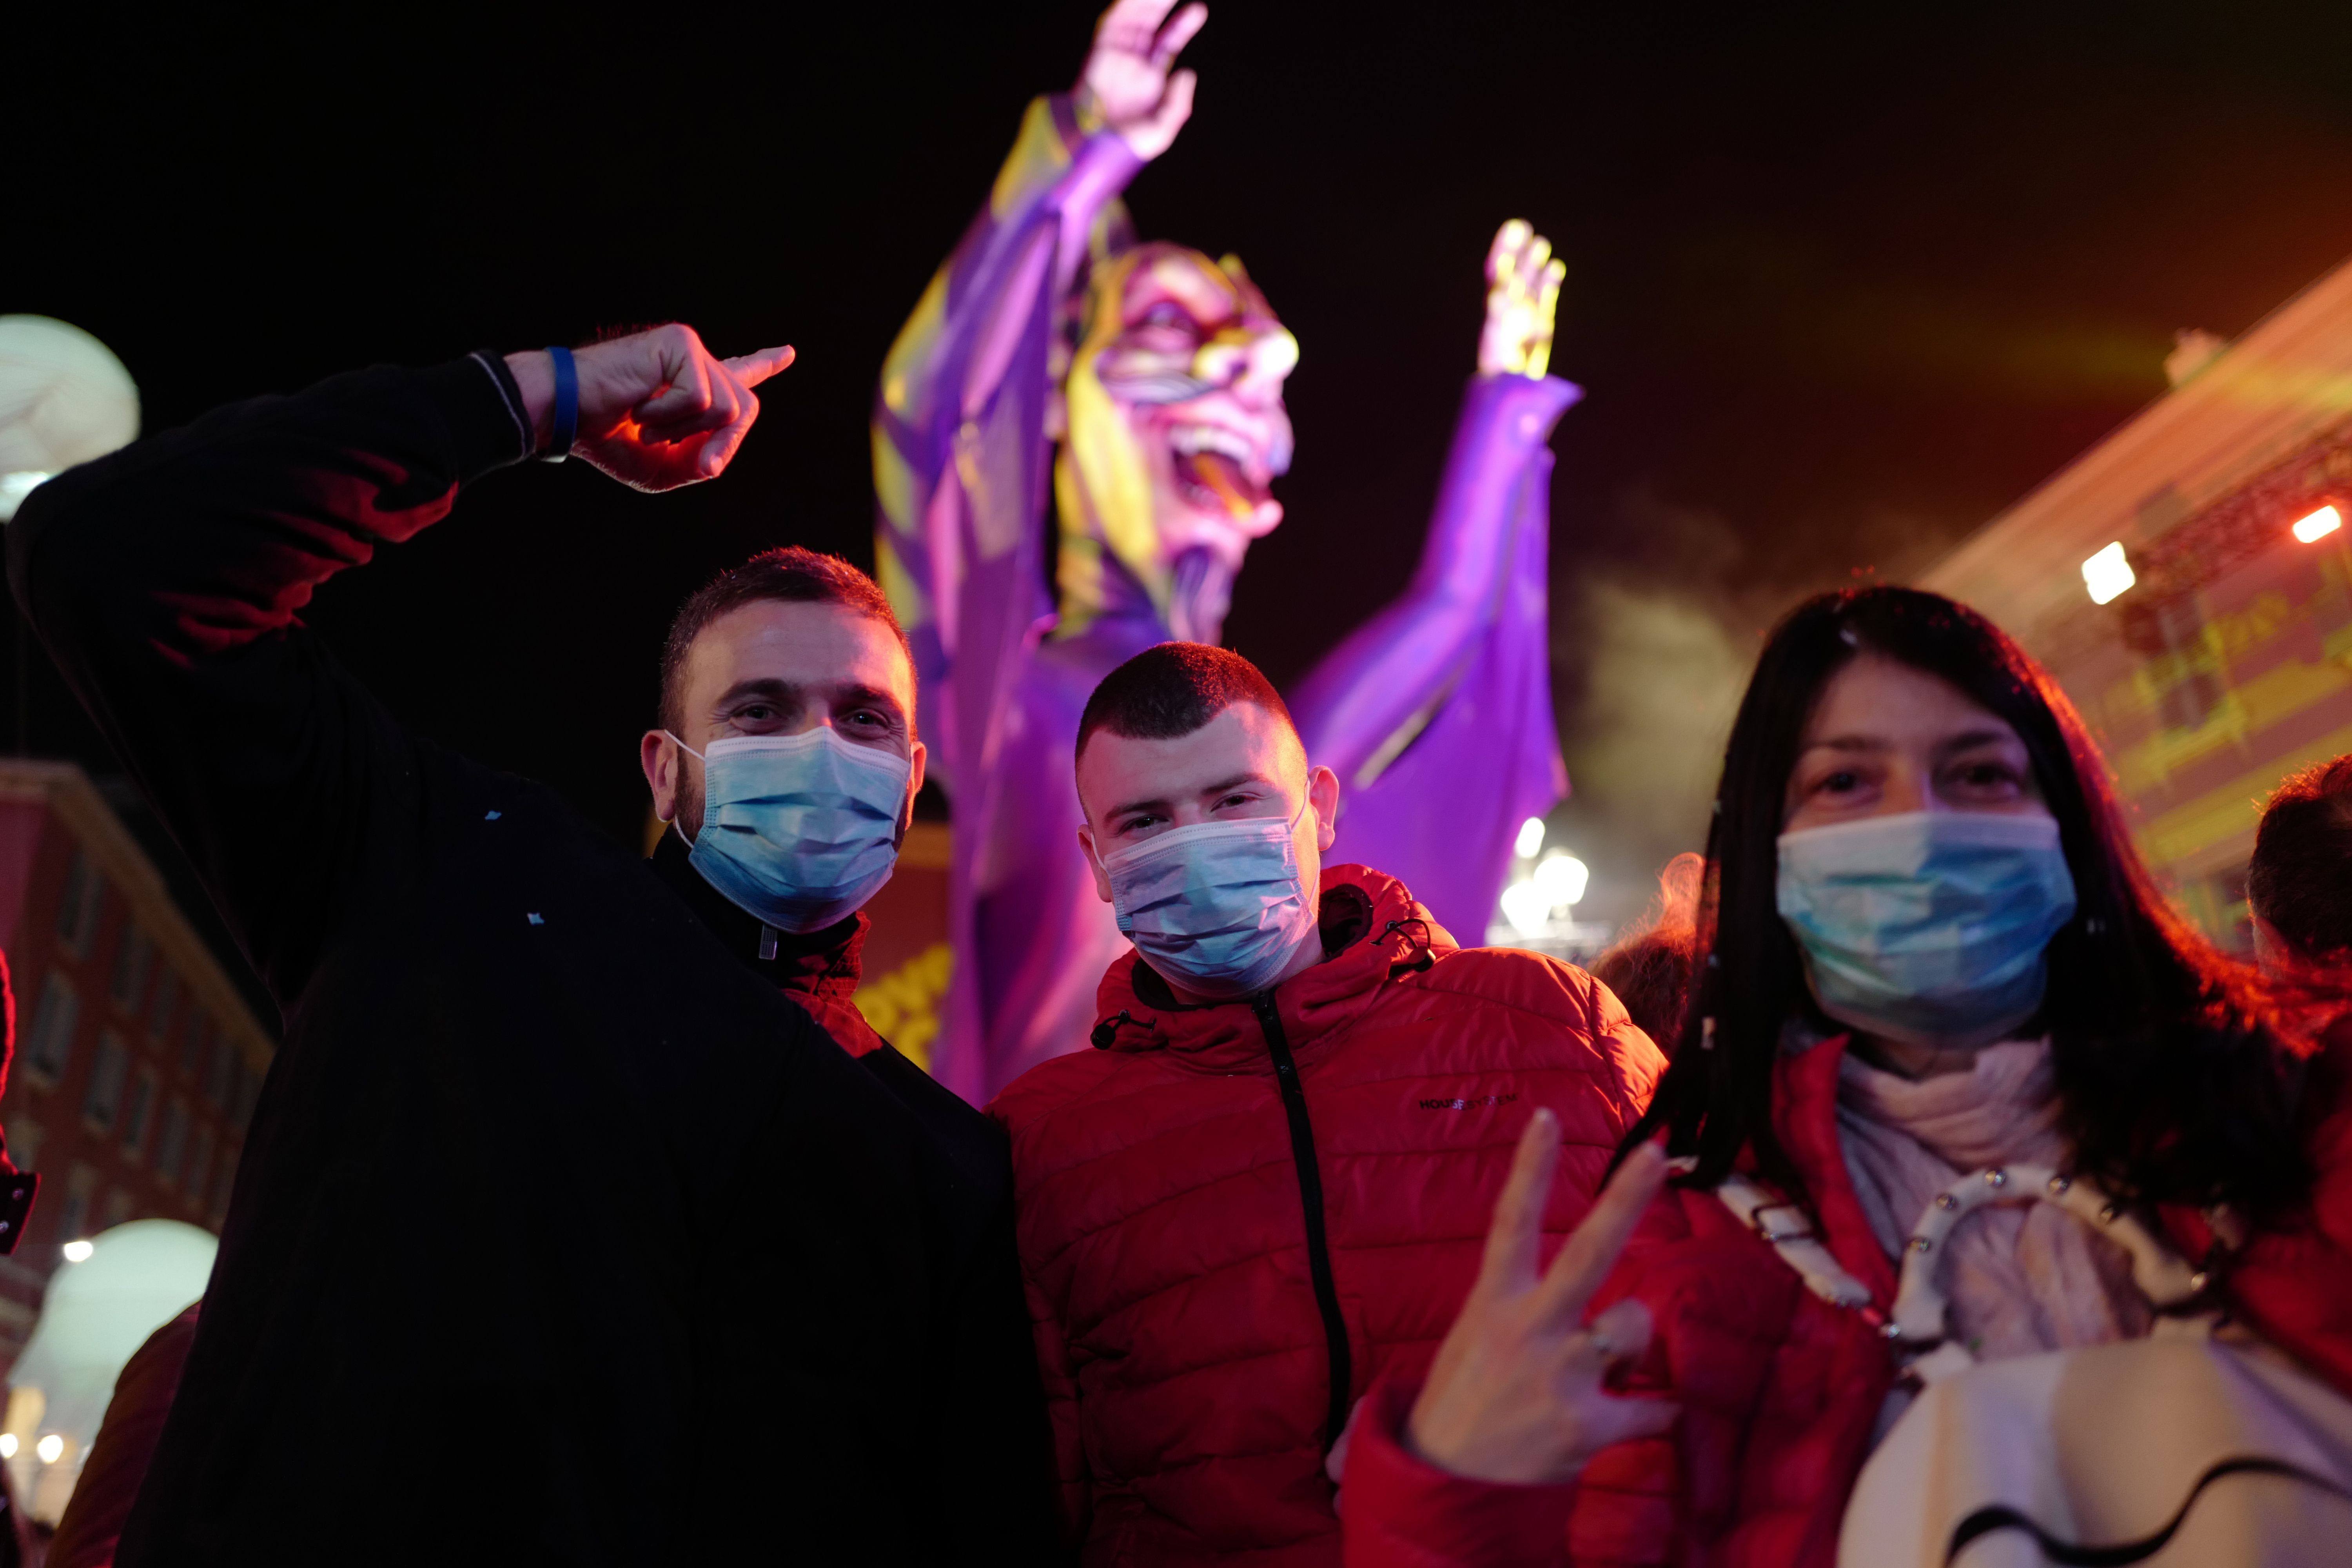  Revellers wear masks to protect themselves from the COVID-19 illness as they attend the Nice carnival